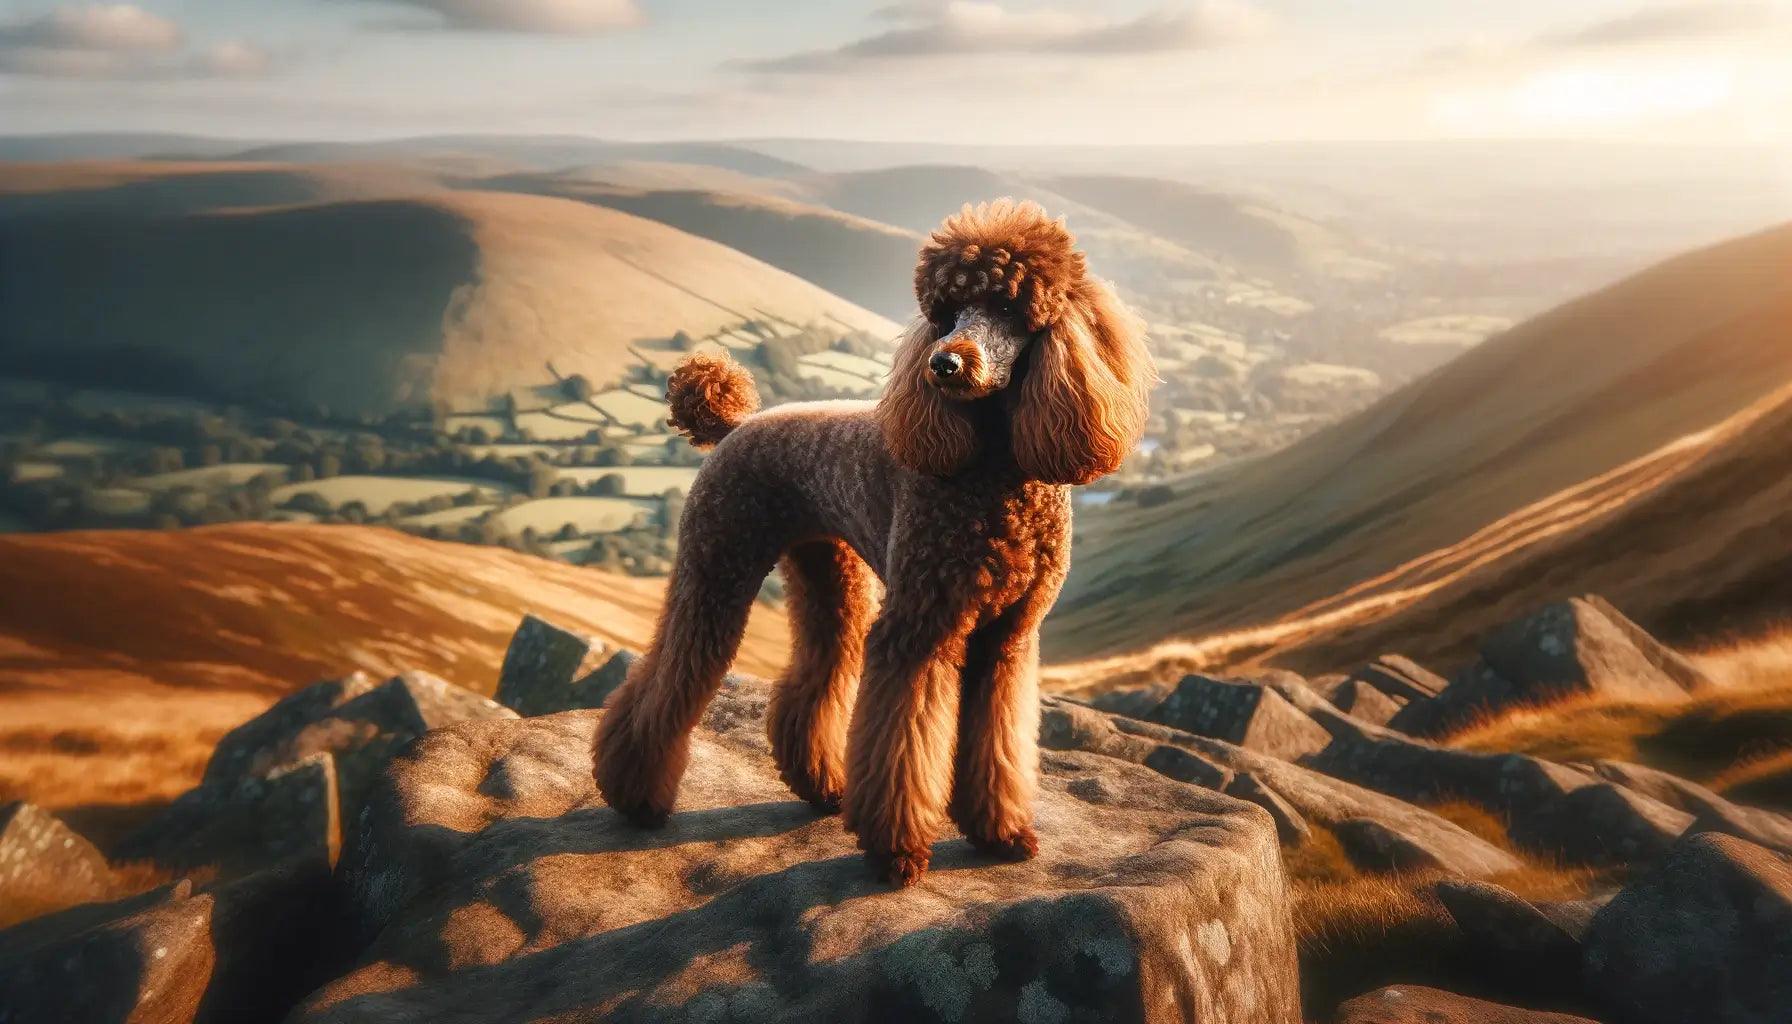 A brown Poodle standing on a rocky outcrop, with a hilly natural landscape in the background.